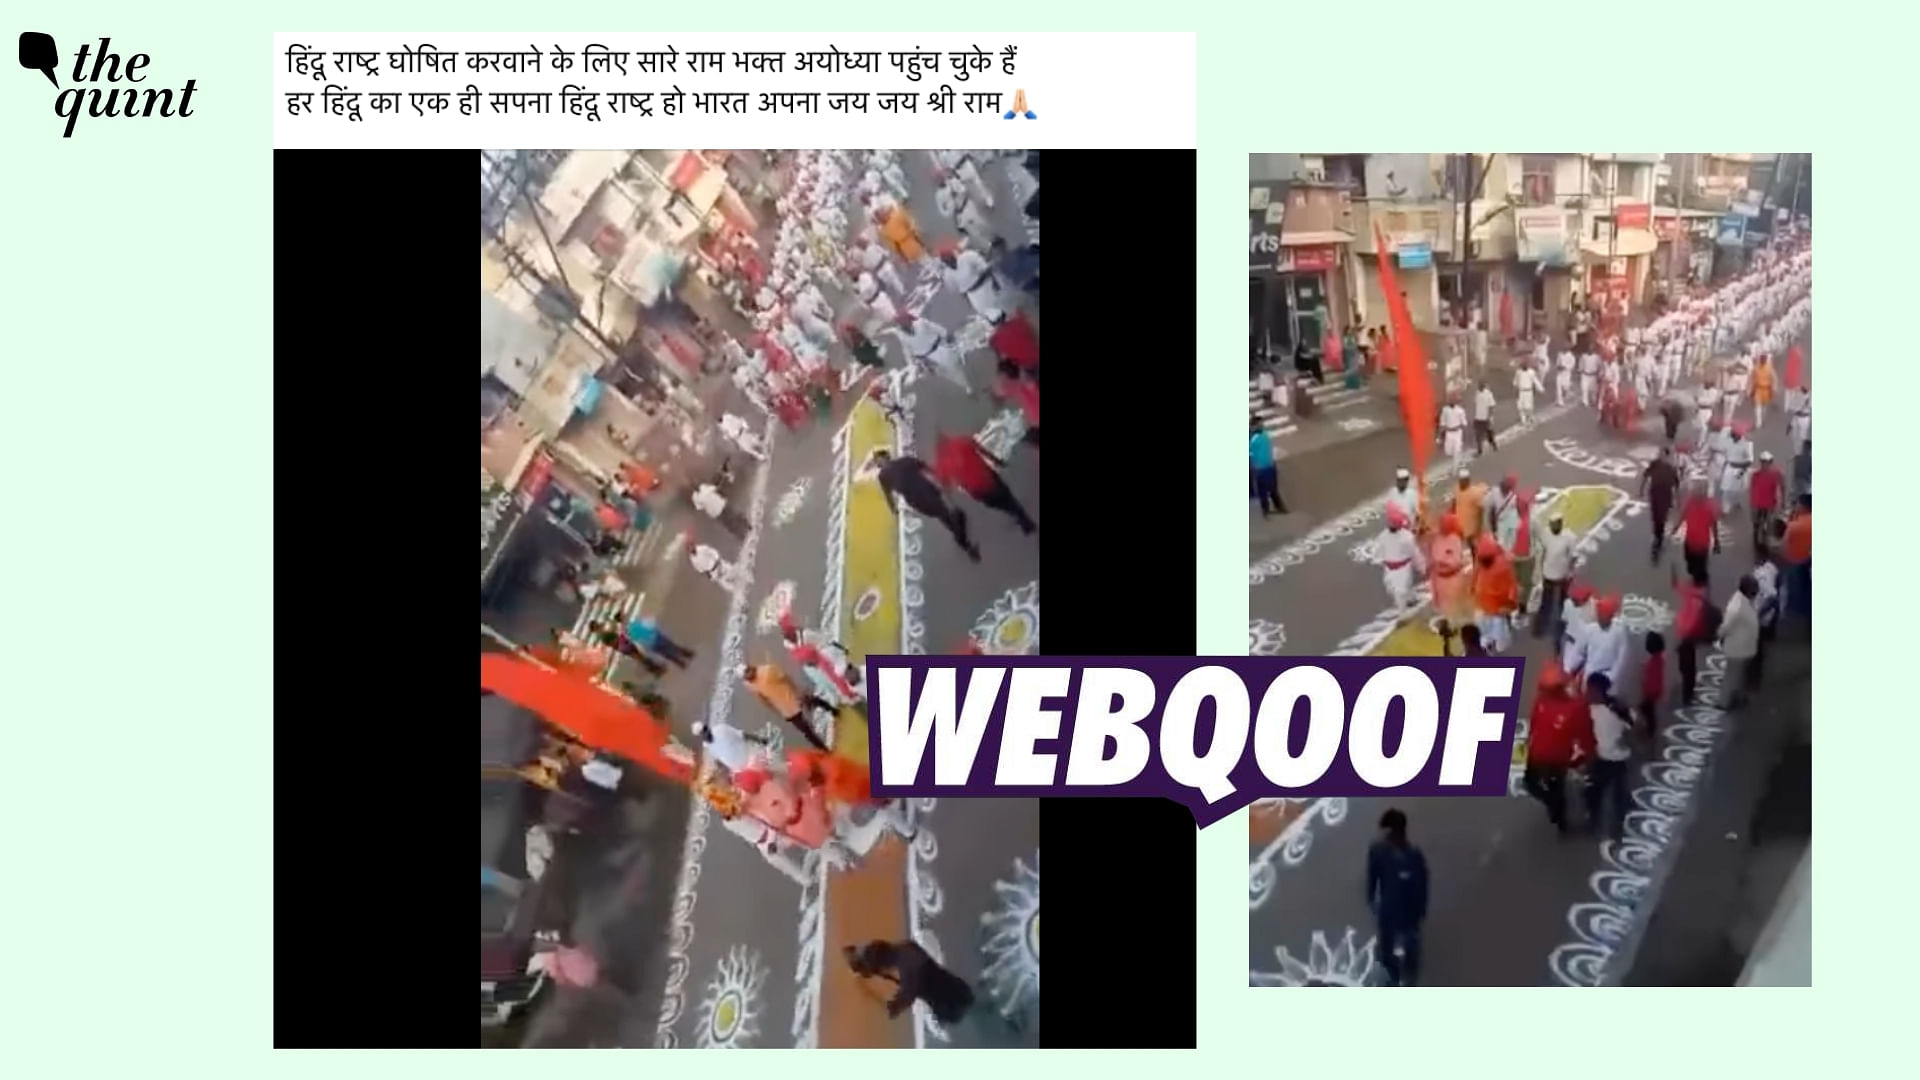 <div class="paragraphs"><p>The claim states that the video shows Lord Ram devotees reaching Ayodhya.</p></div>